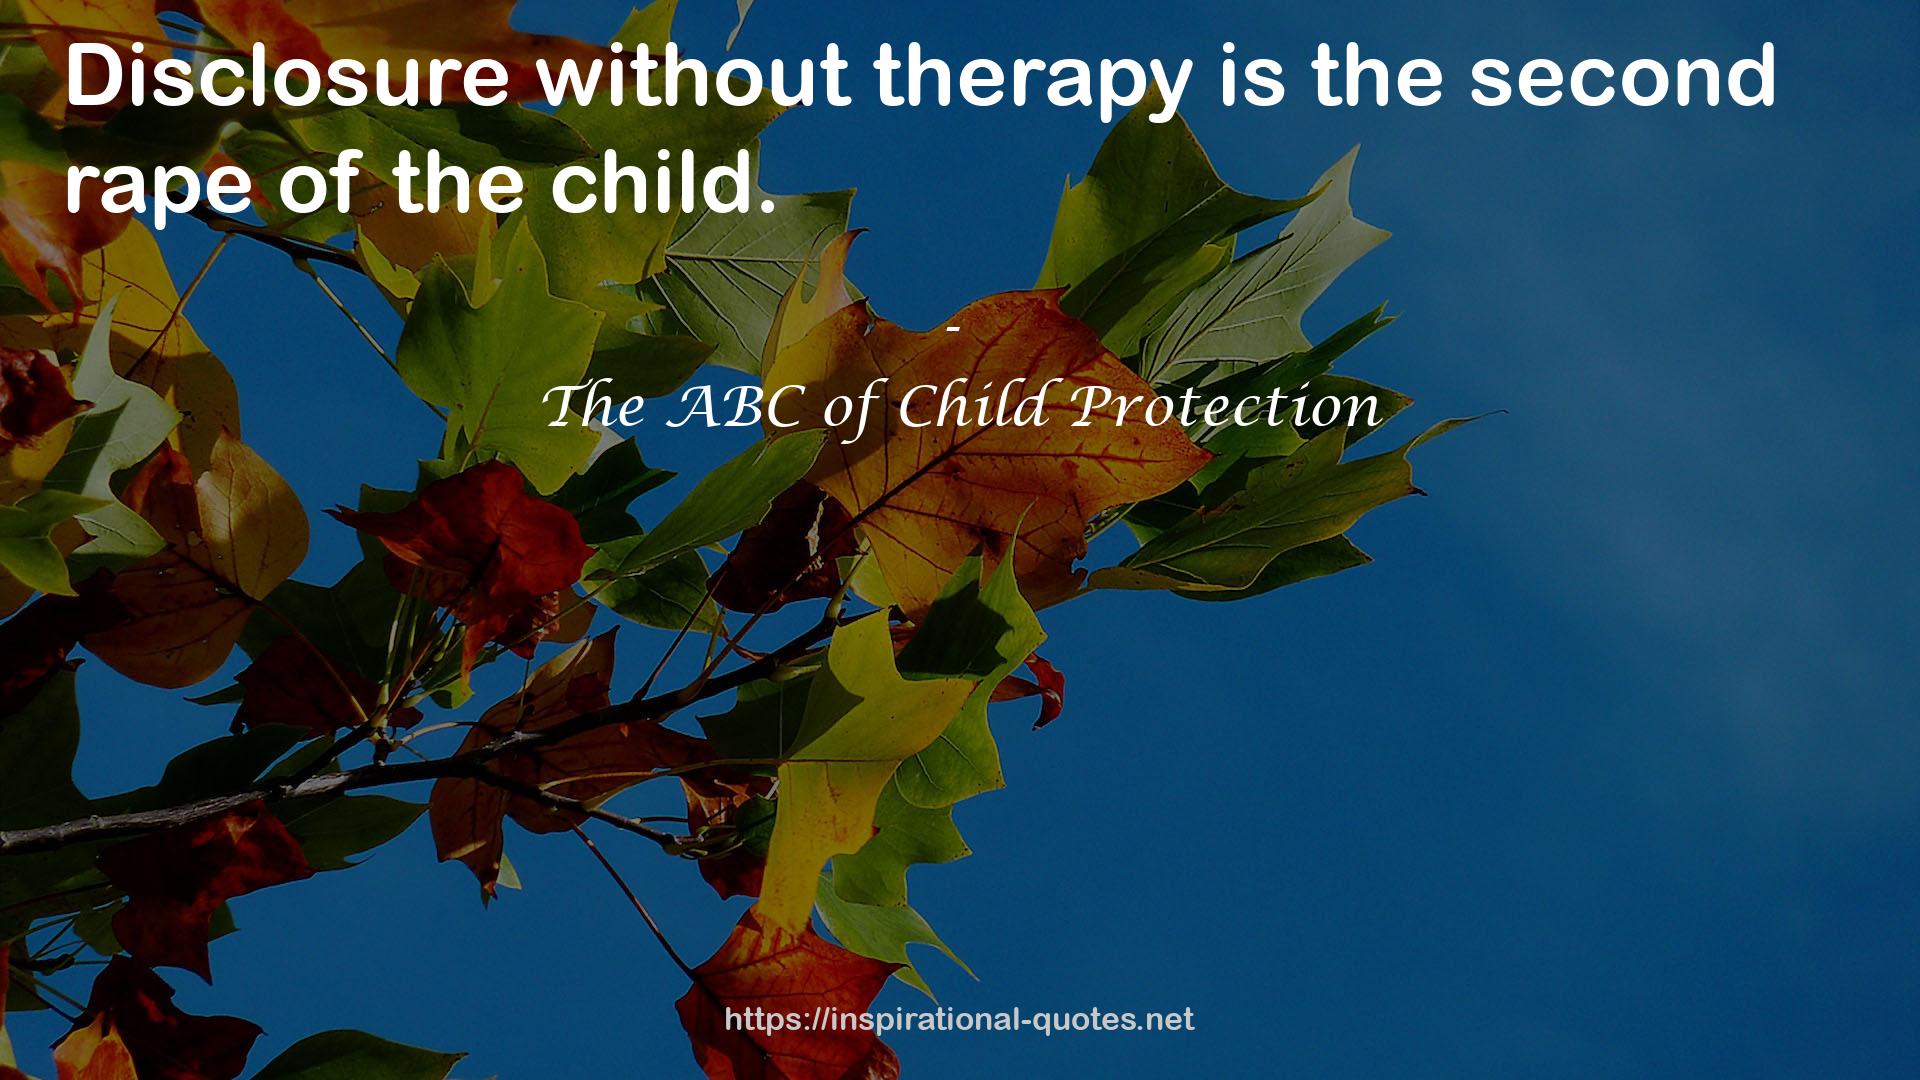 The ABC of Child Protection QUOTES